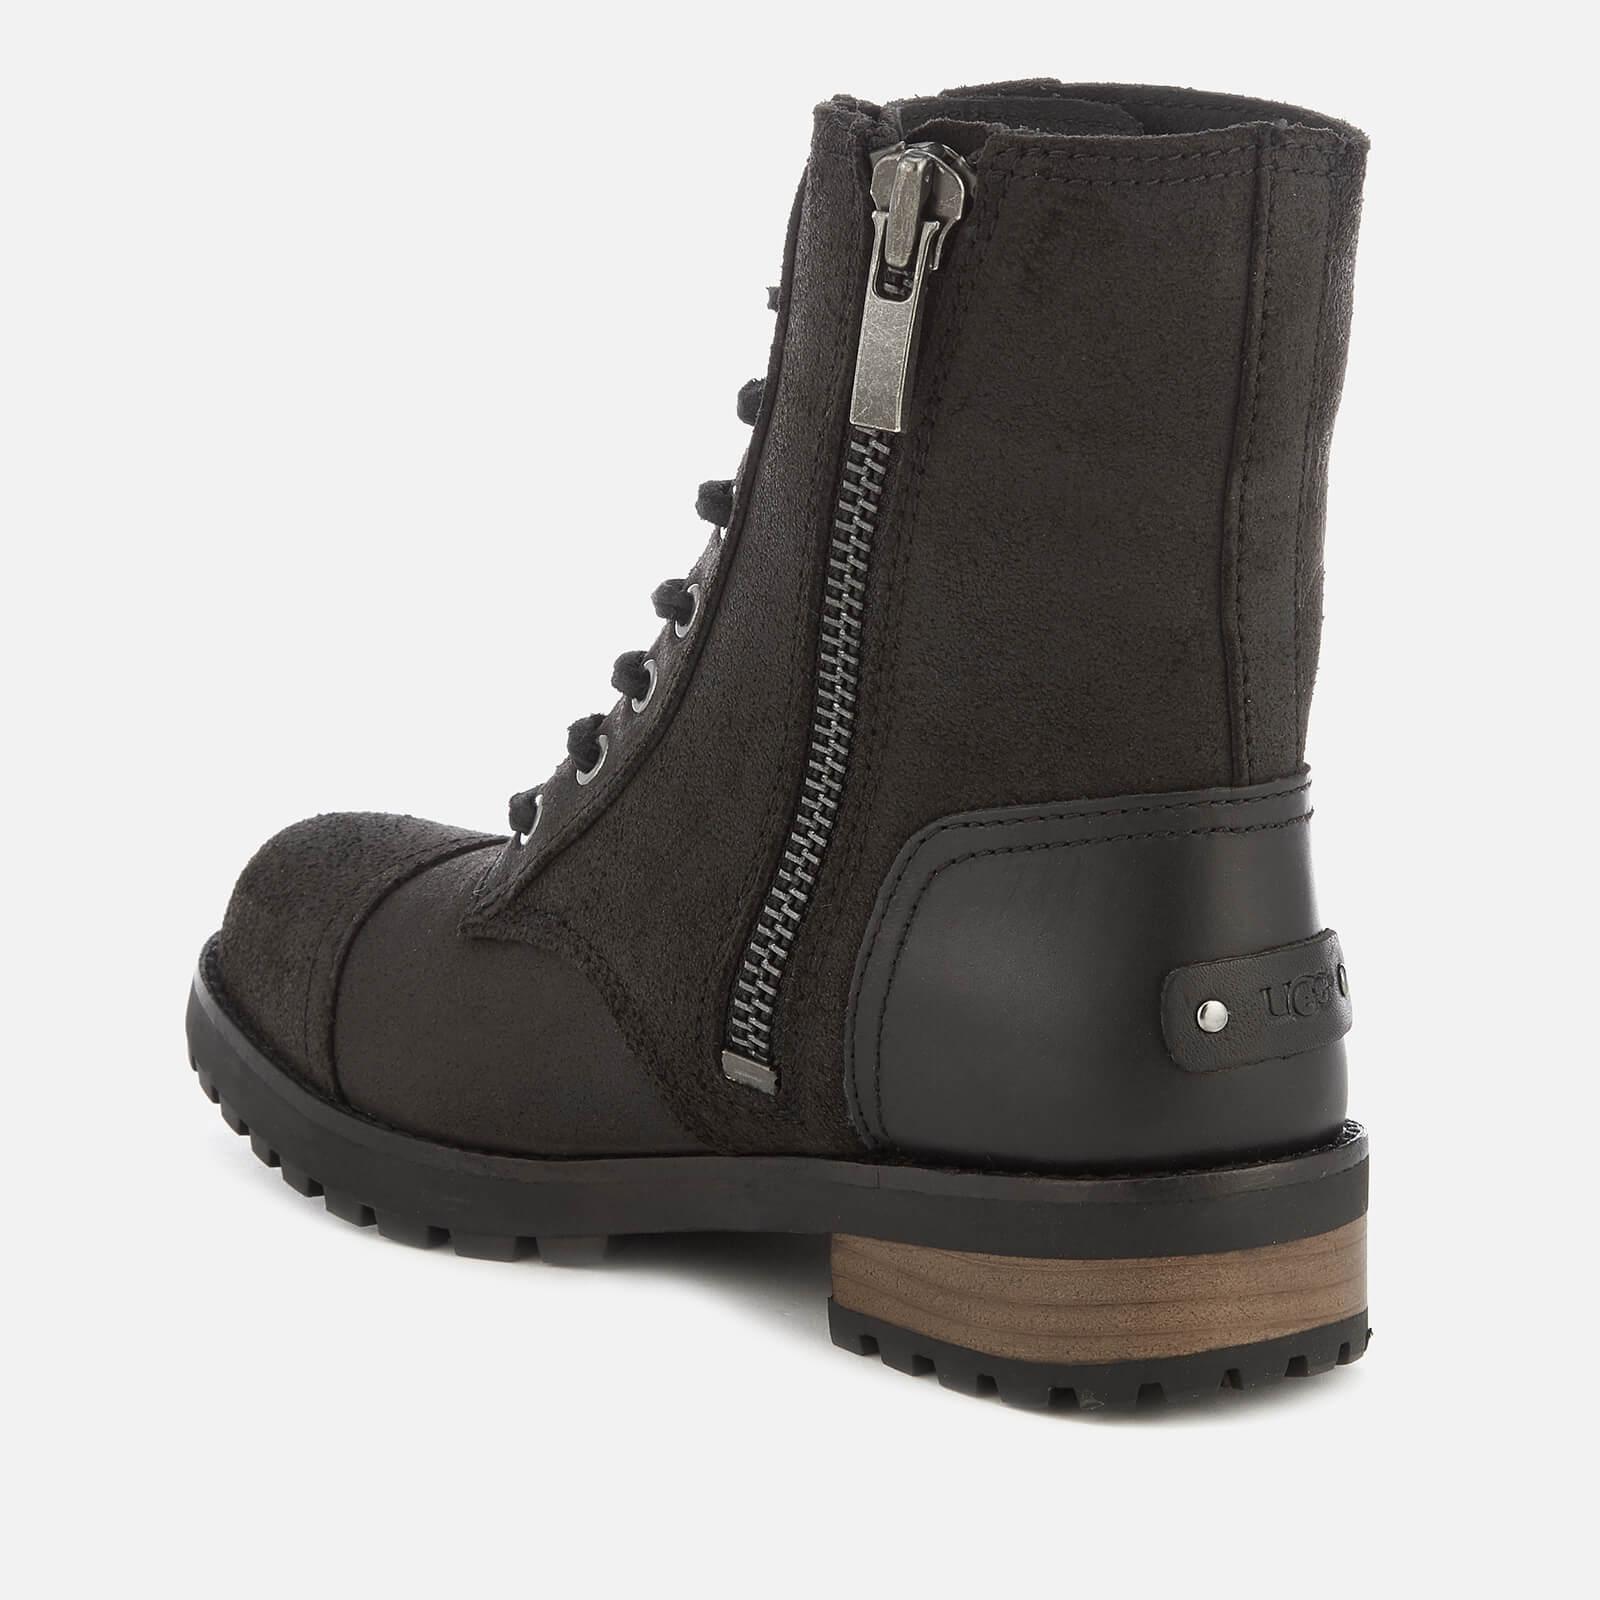 UGG Kilmer Ii Water Resistant Leather Lace-up Boots in Black - Lyst